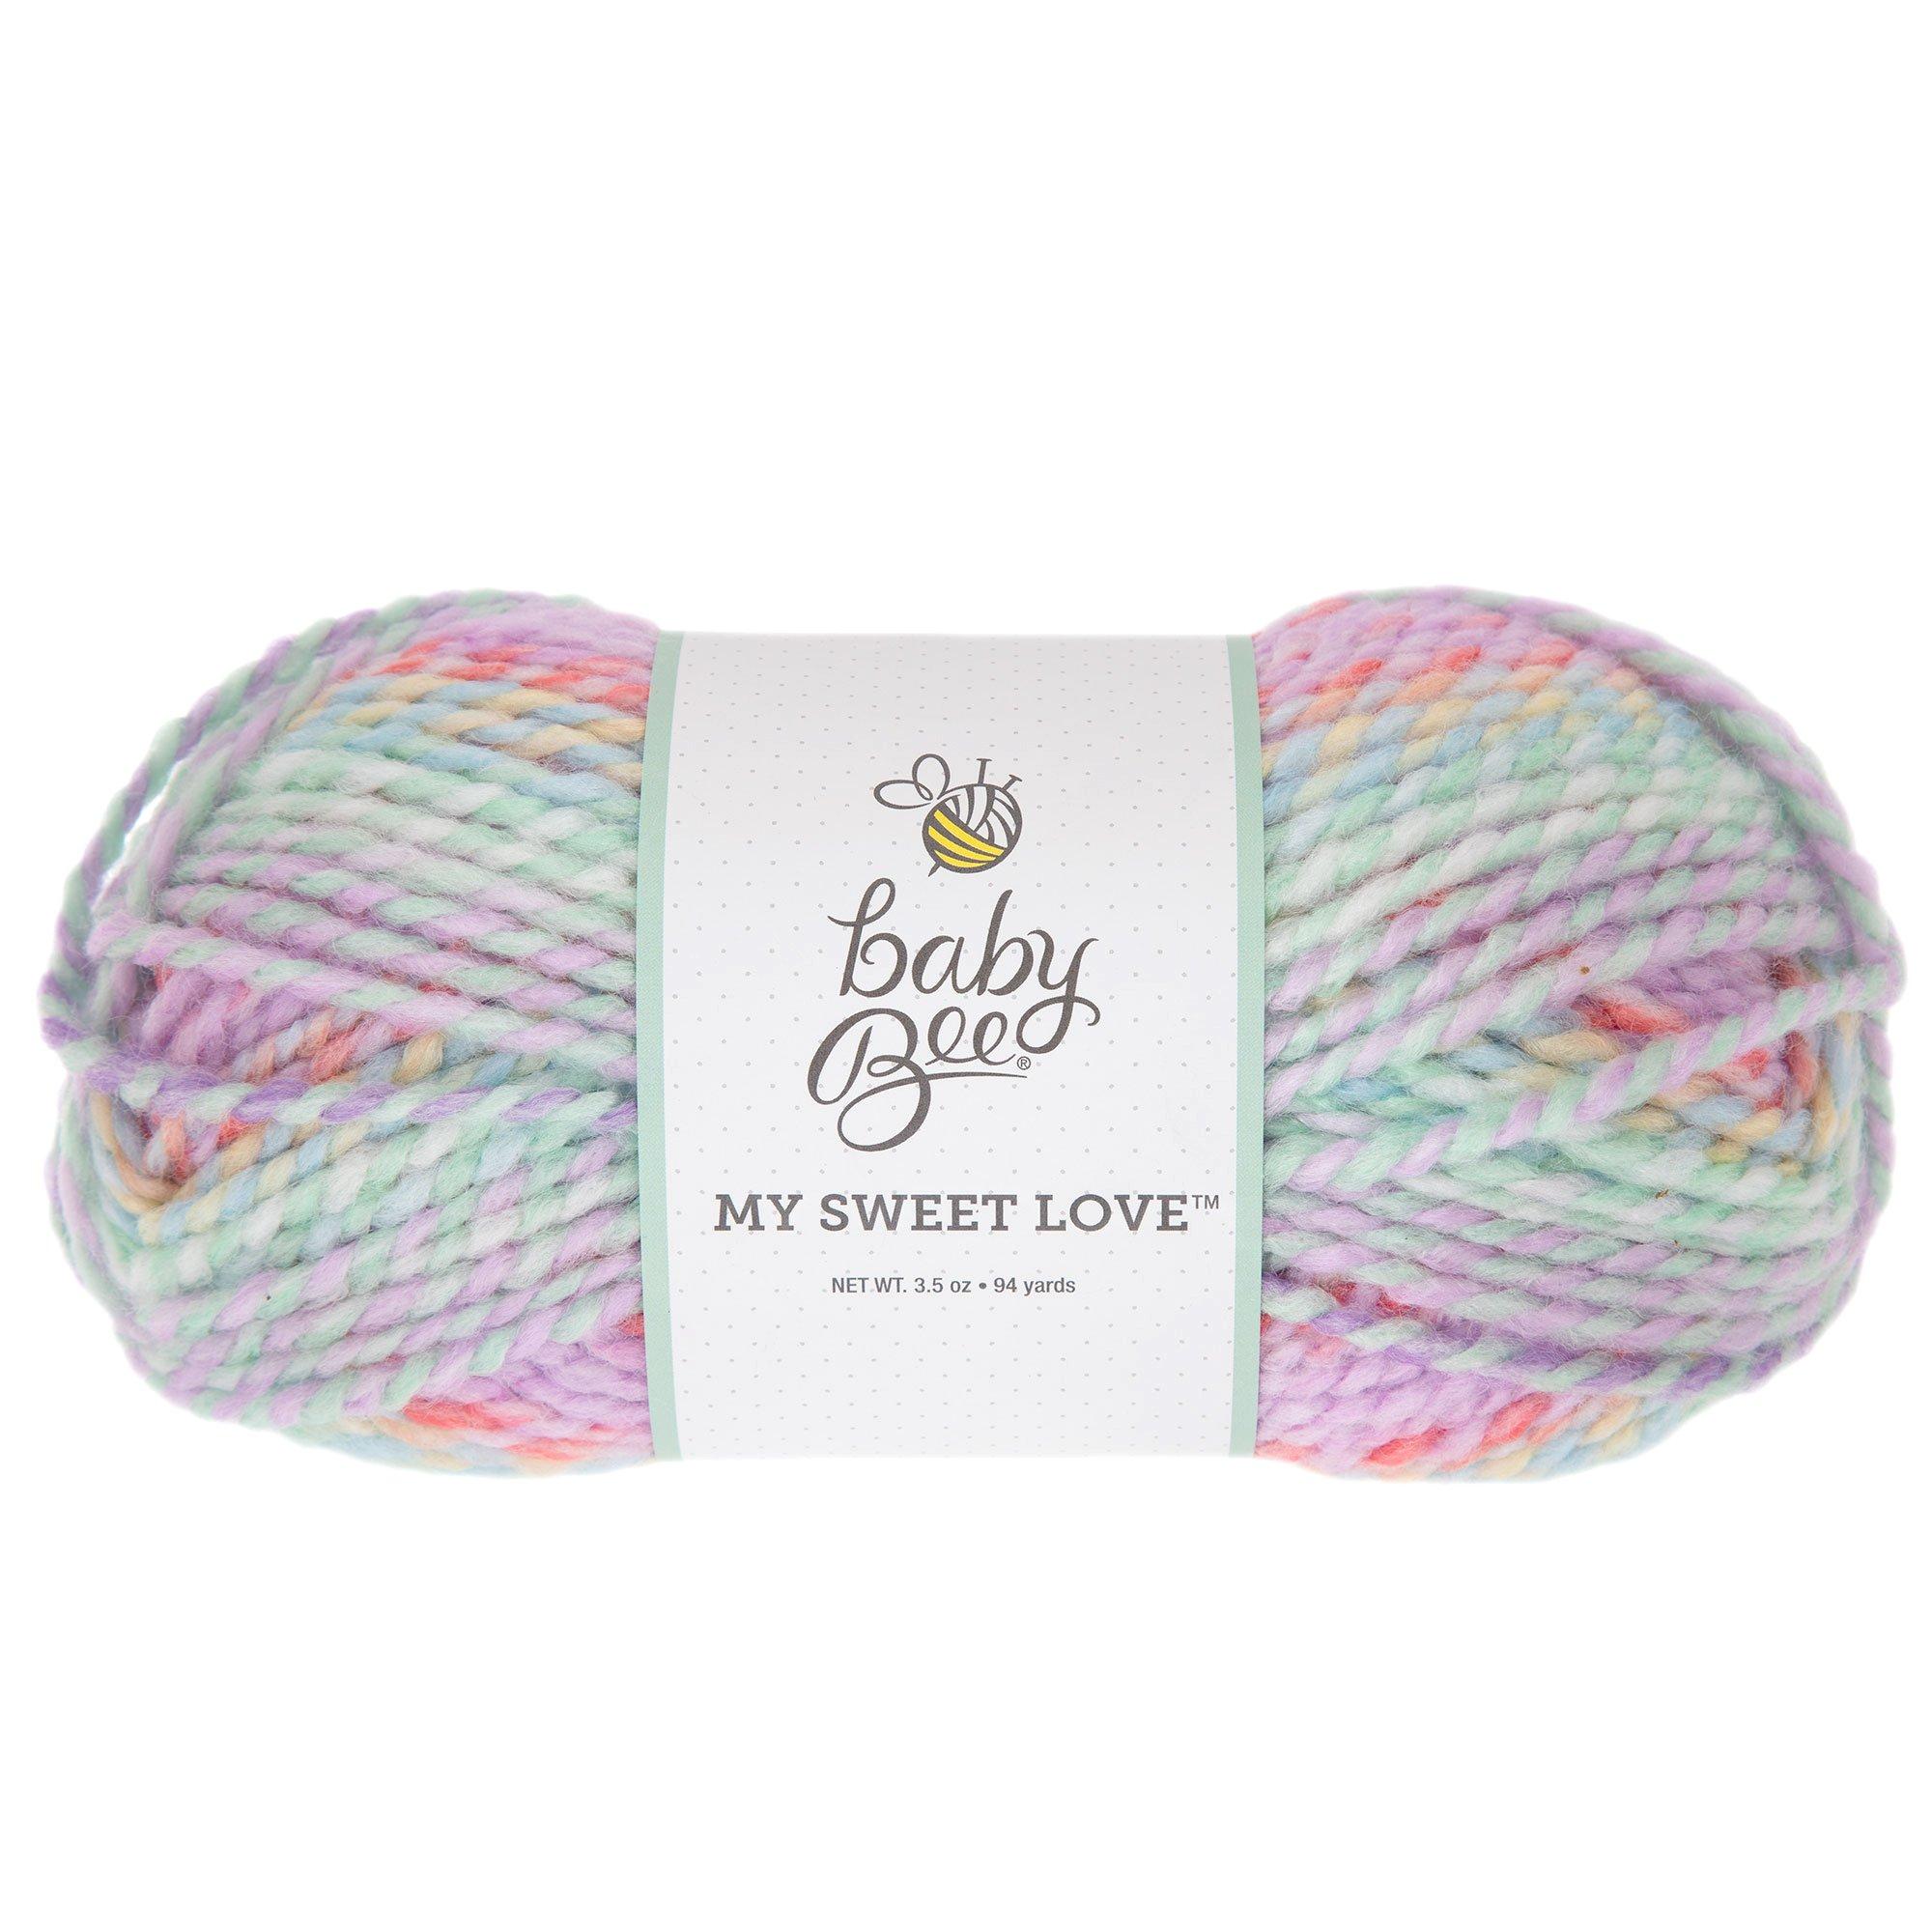 About Baby Bee – Lazy Bee Yarn